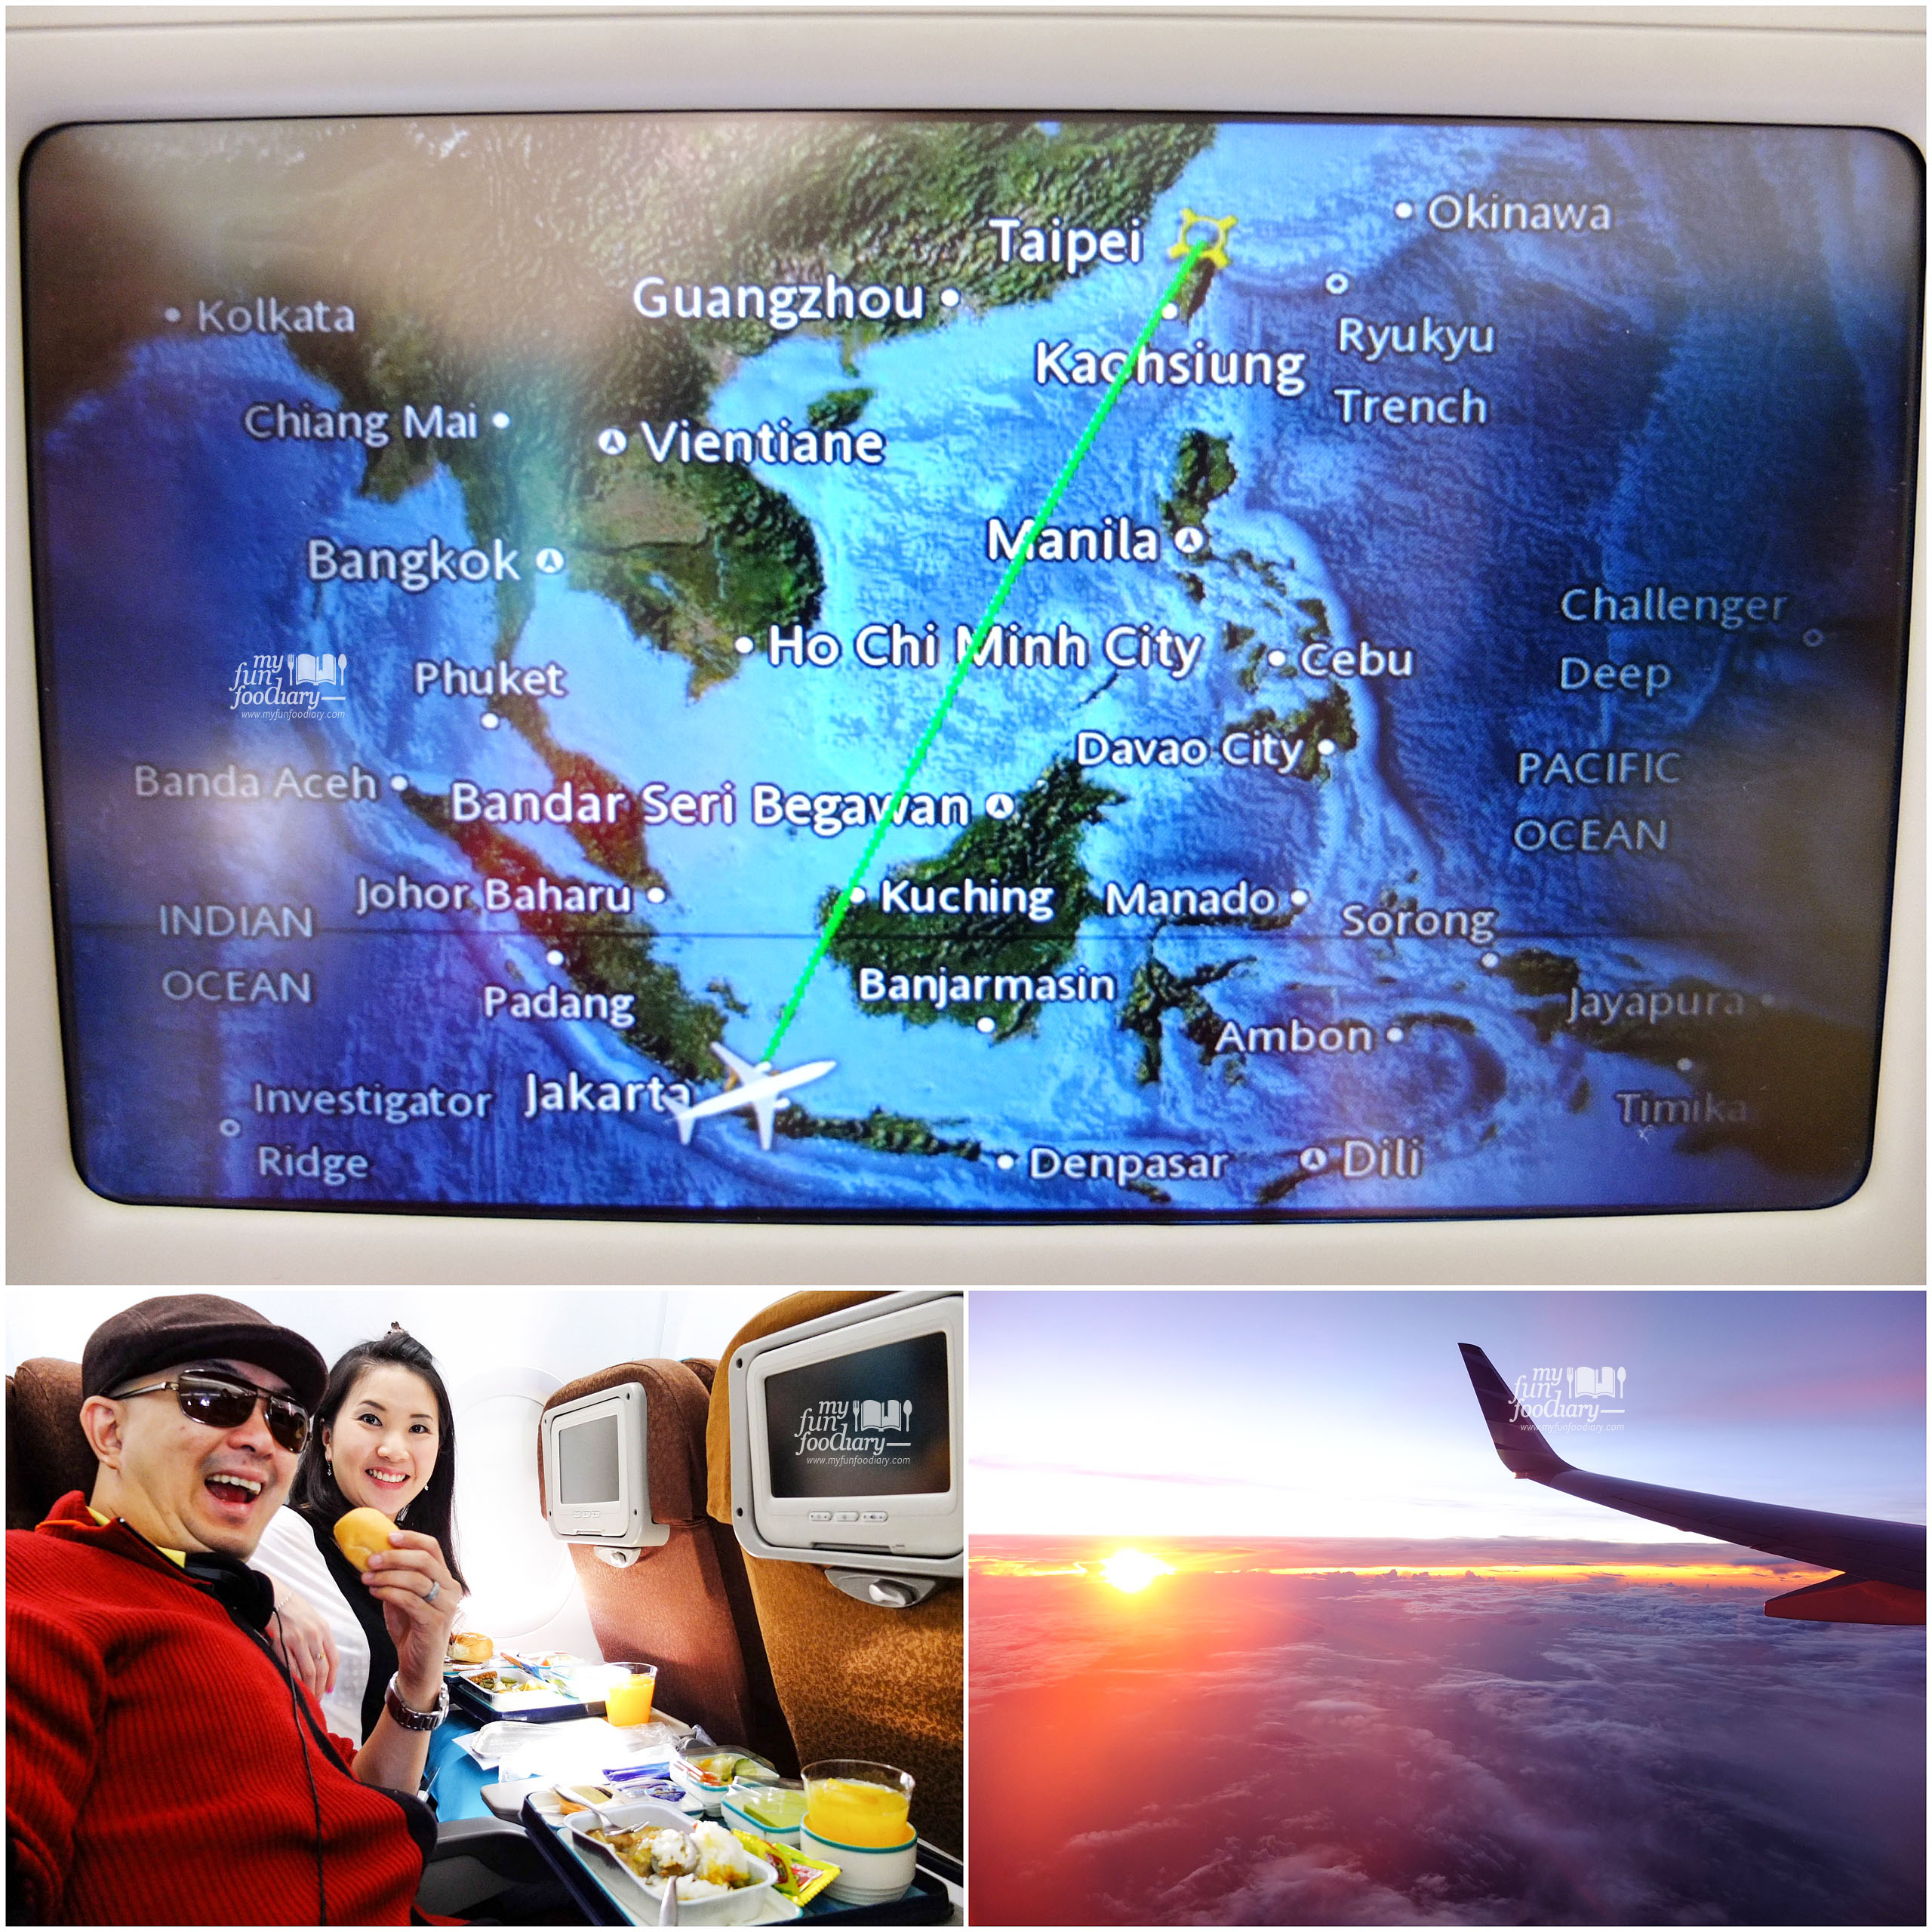 Our Flight to Taiwan by Garuda Airlines - Myfunfoodiary